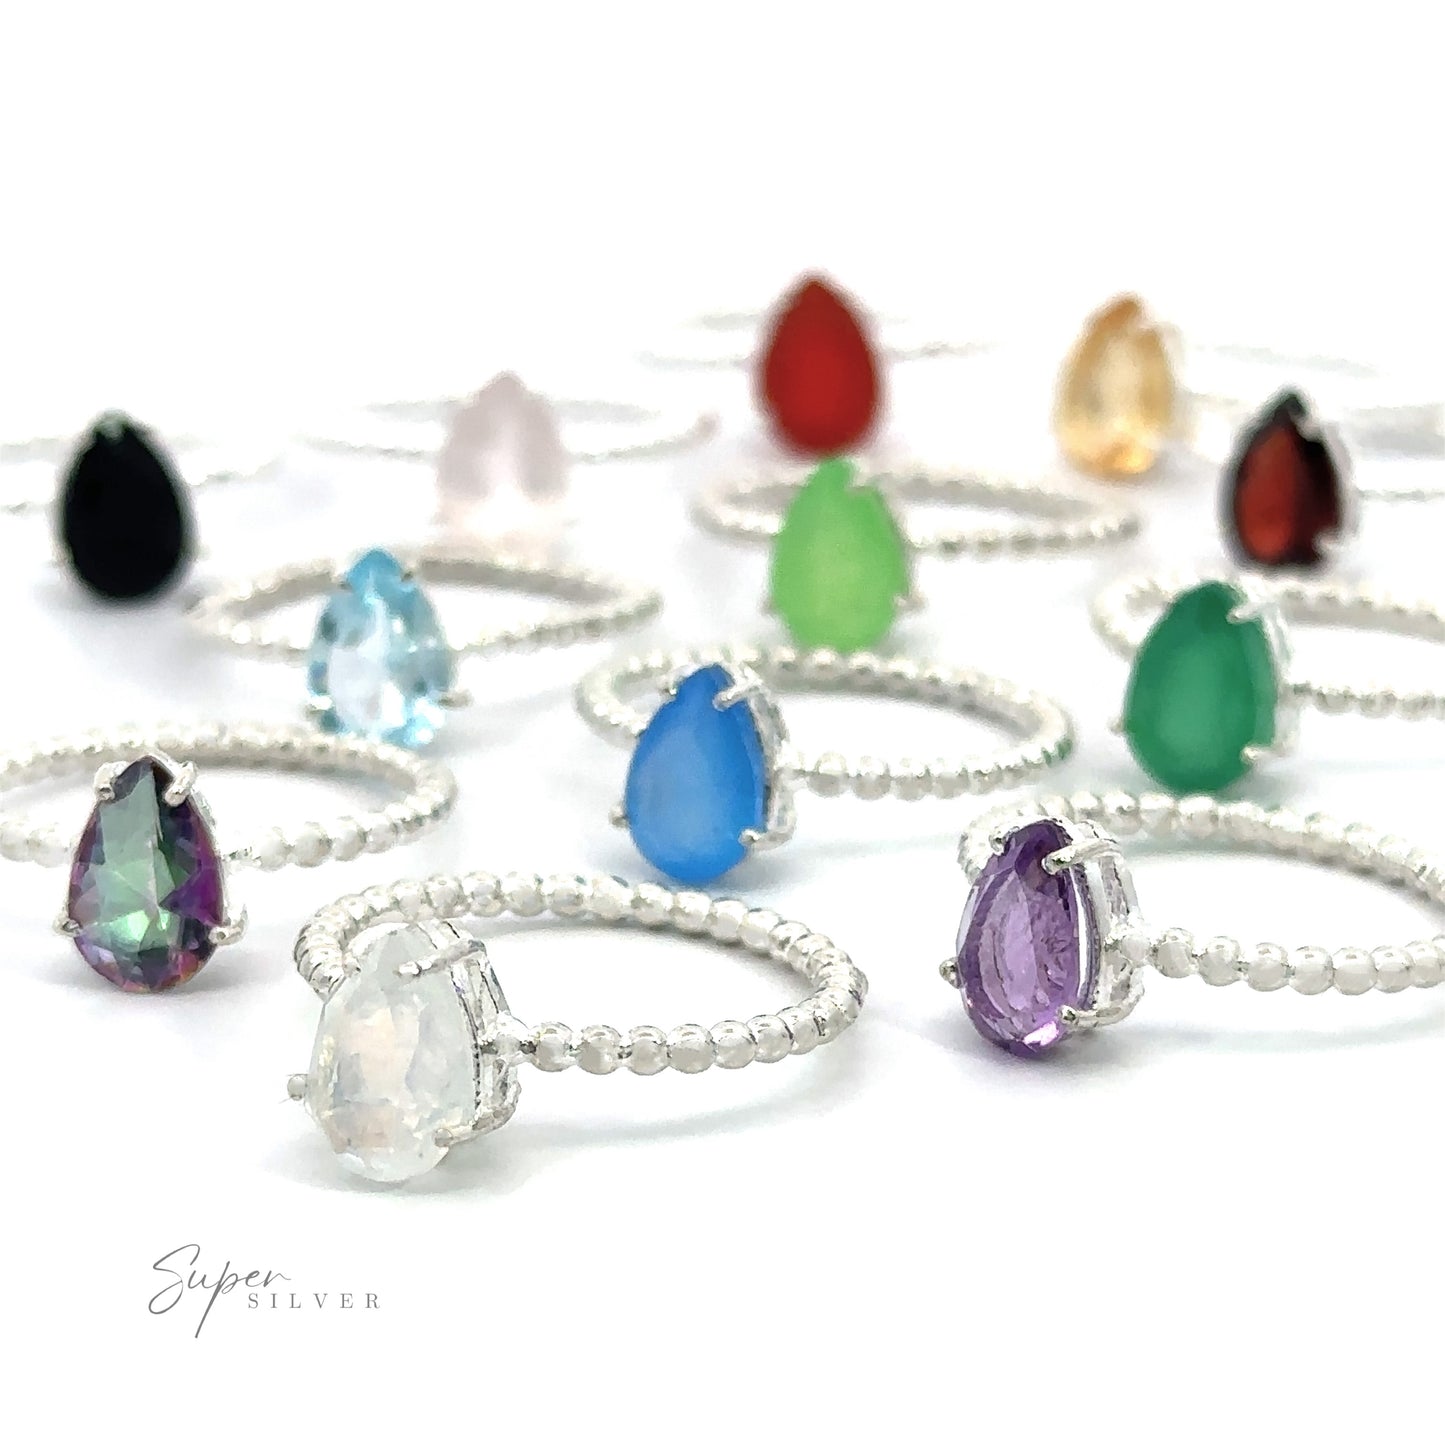 A collection of Vibrant Teardrop Gemstone Rings with Beaded Bands displayed on a white surface.